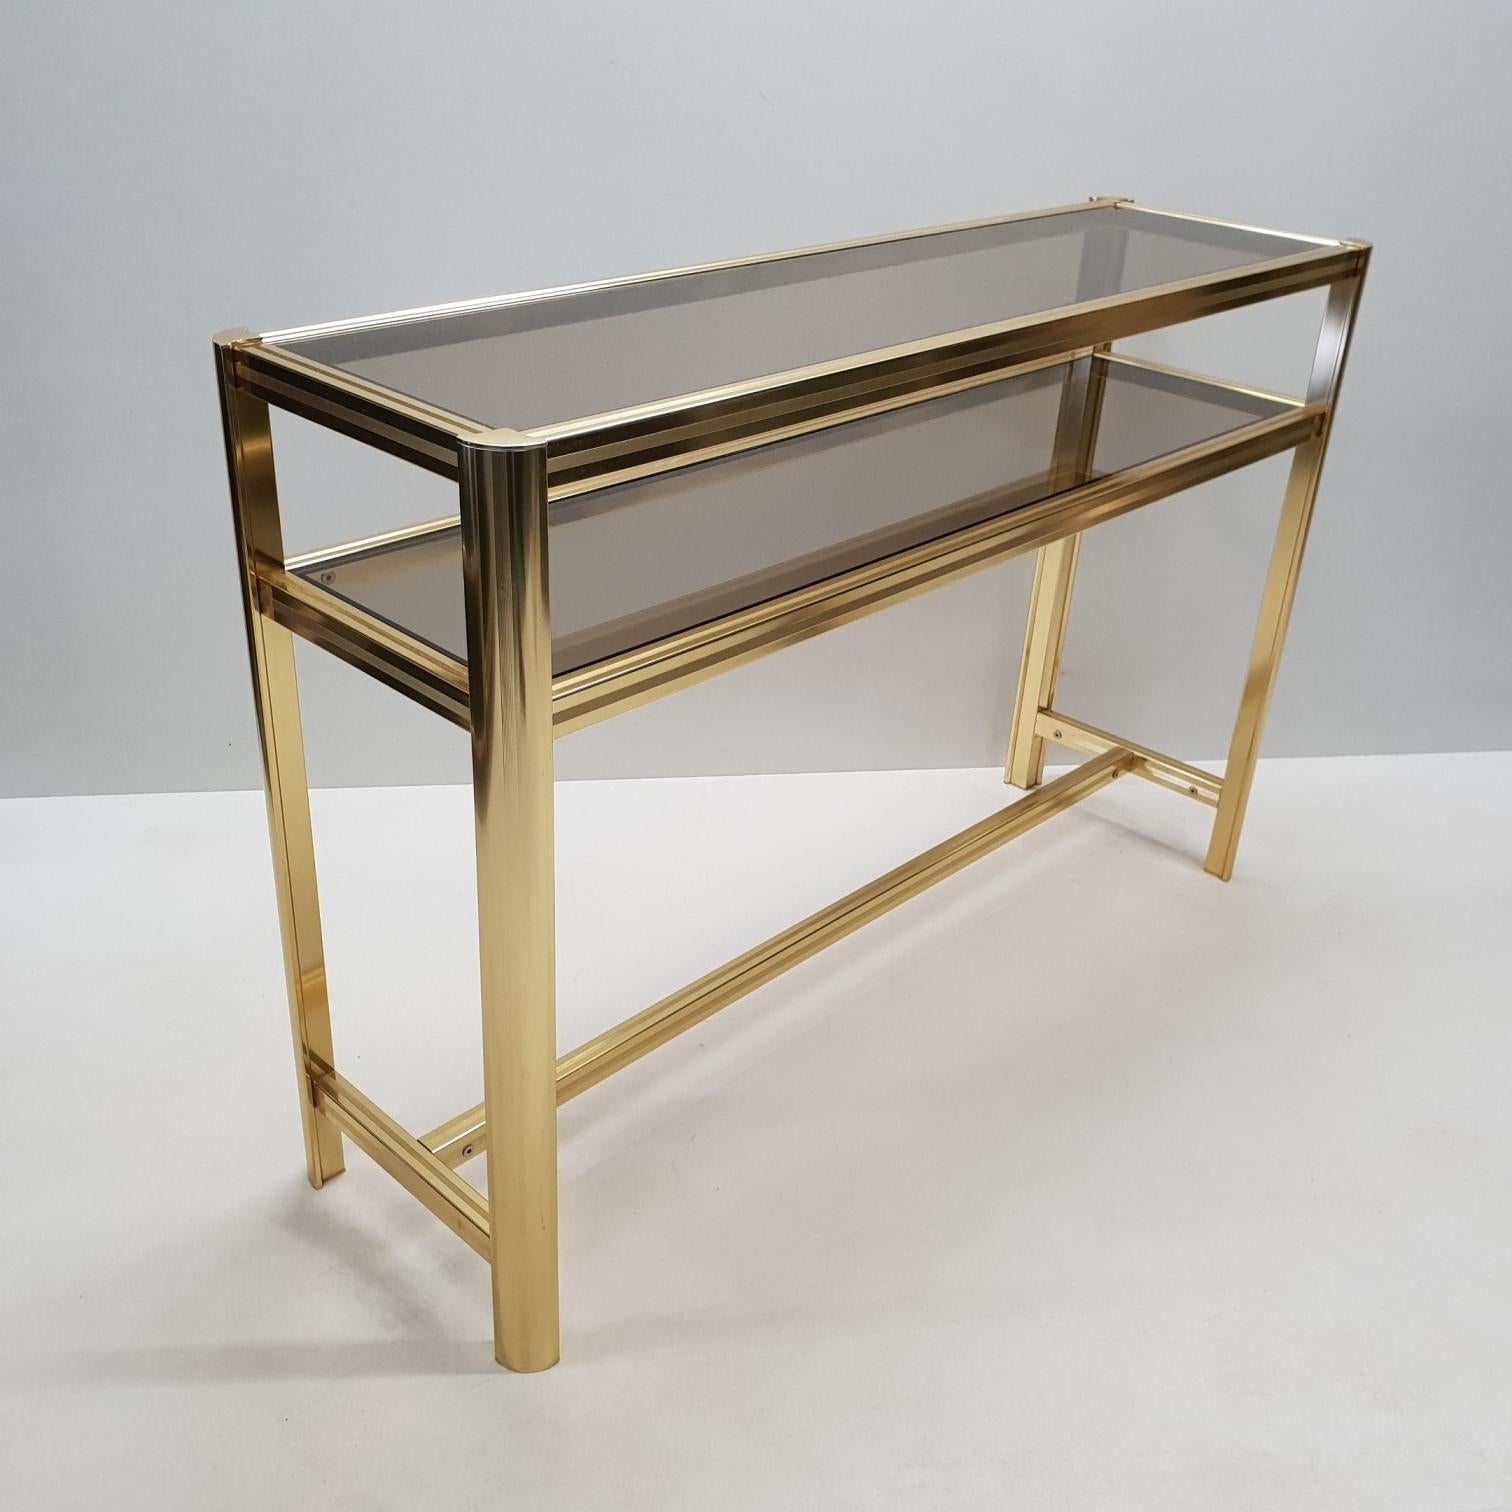 Aluminum Italian Modern Gilt Brass Two Tiers Side Table with Smoked Glass, 1980s For Sale